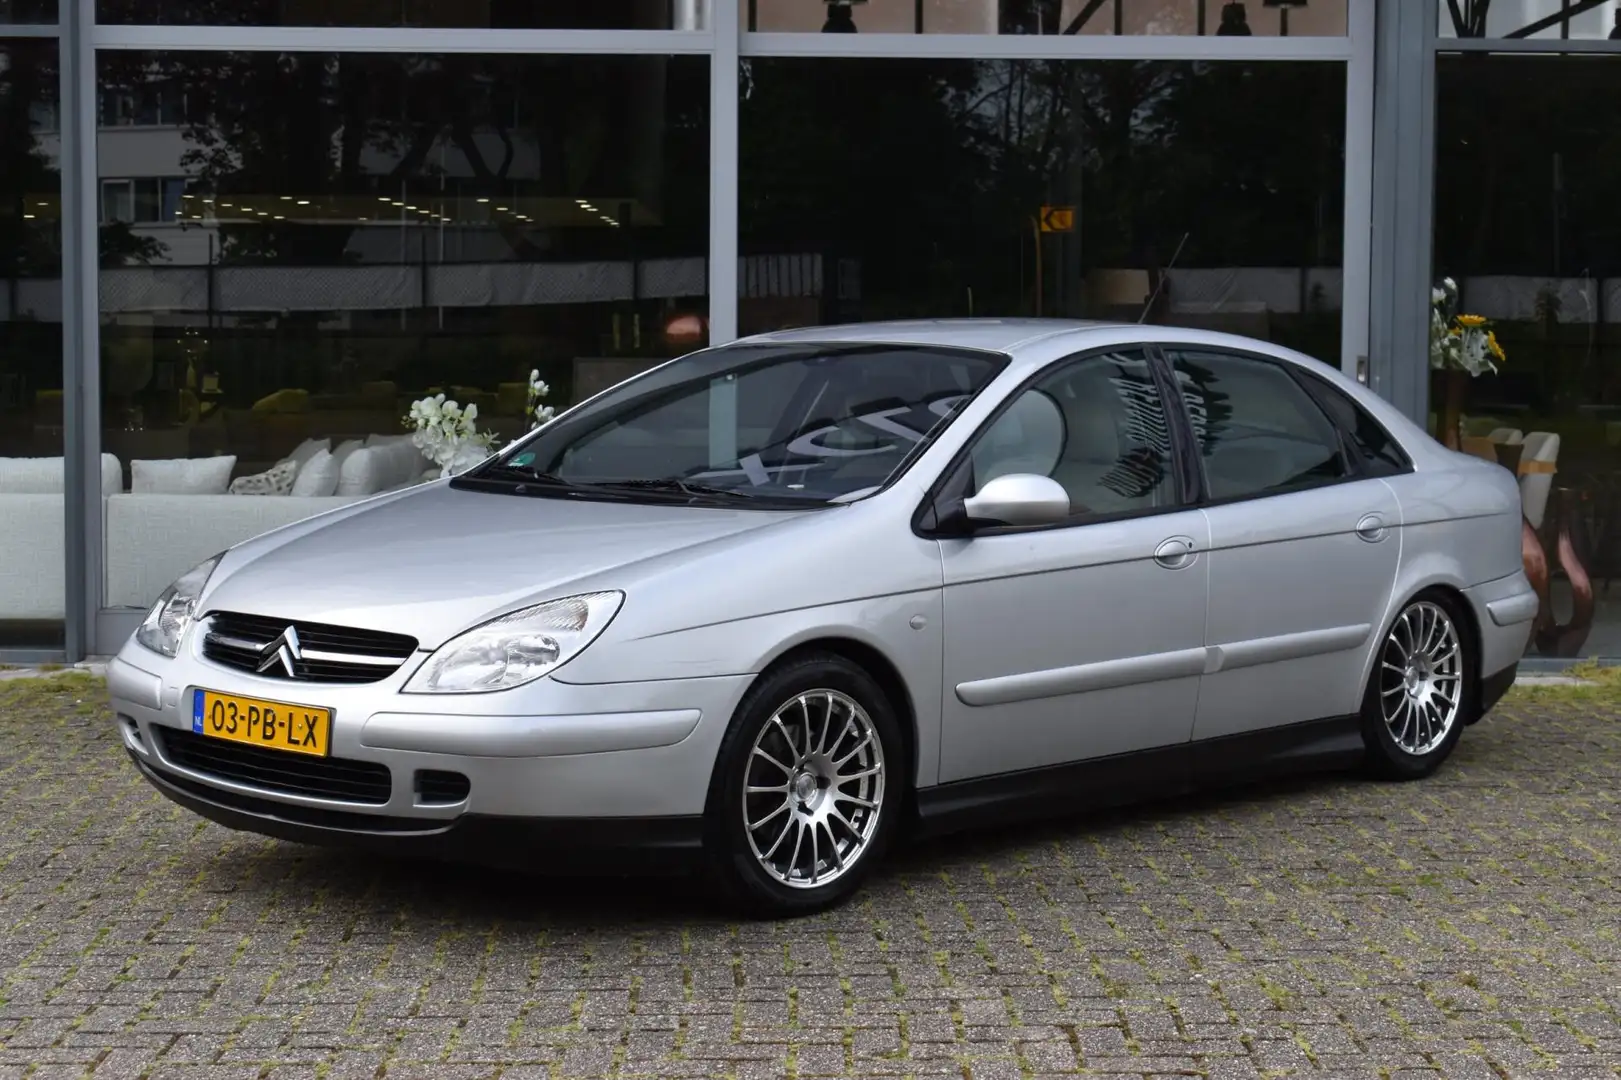 Citroen C5 2.0-16V Différence 2+ Lucht Vering Airco siva - 2